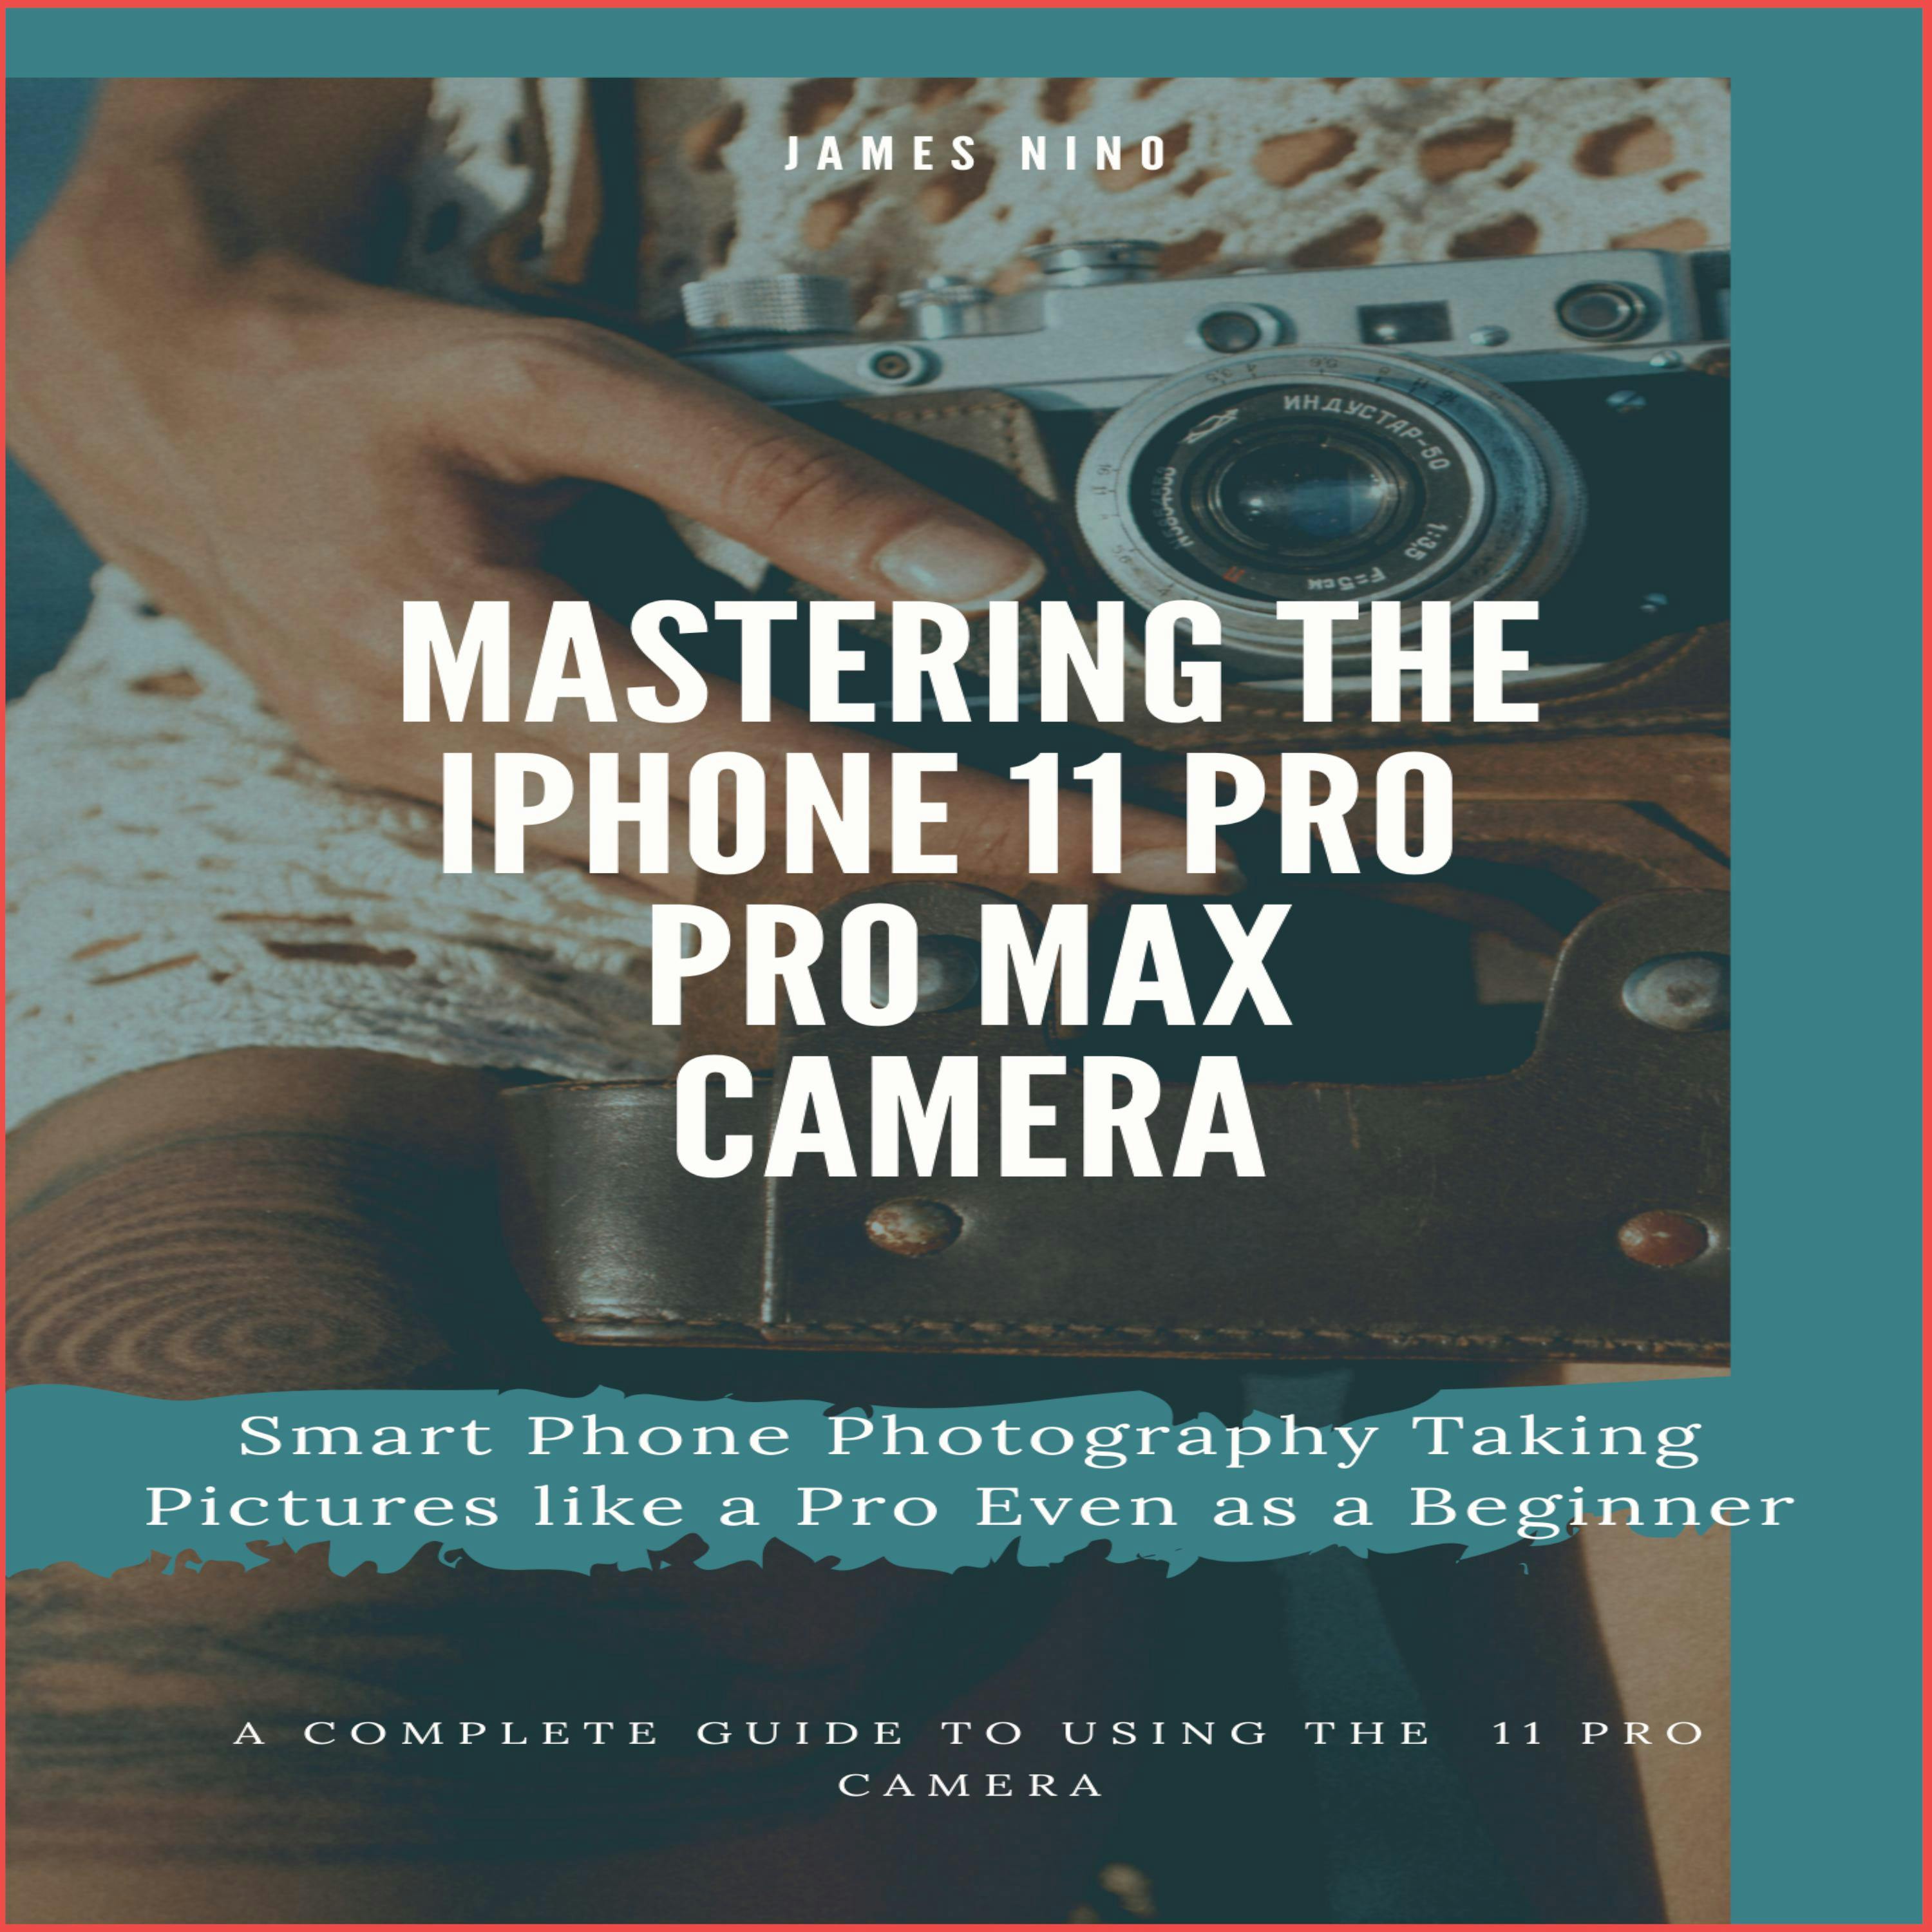 Mastering the iPhone 11 Pro and Pro Max Camera: Smart Phone Photography Taking Pictures like a Pro Even as a Beginner - James Nino